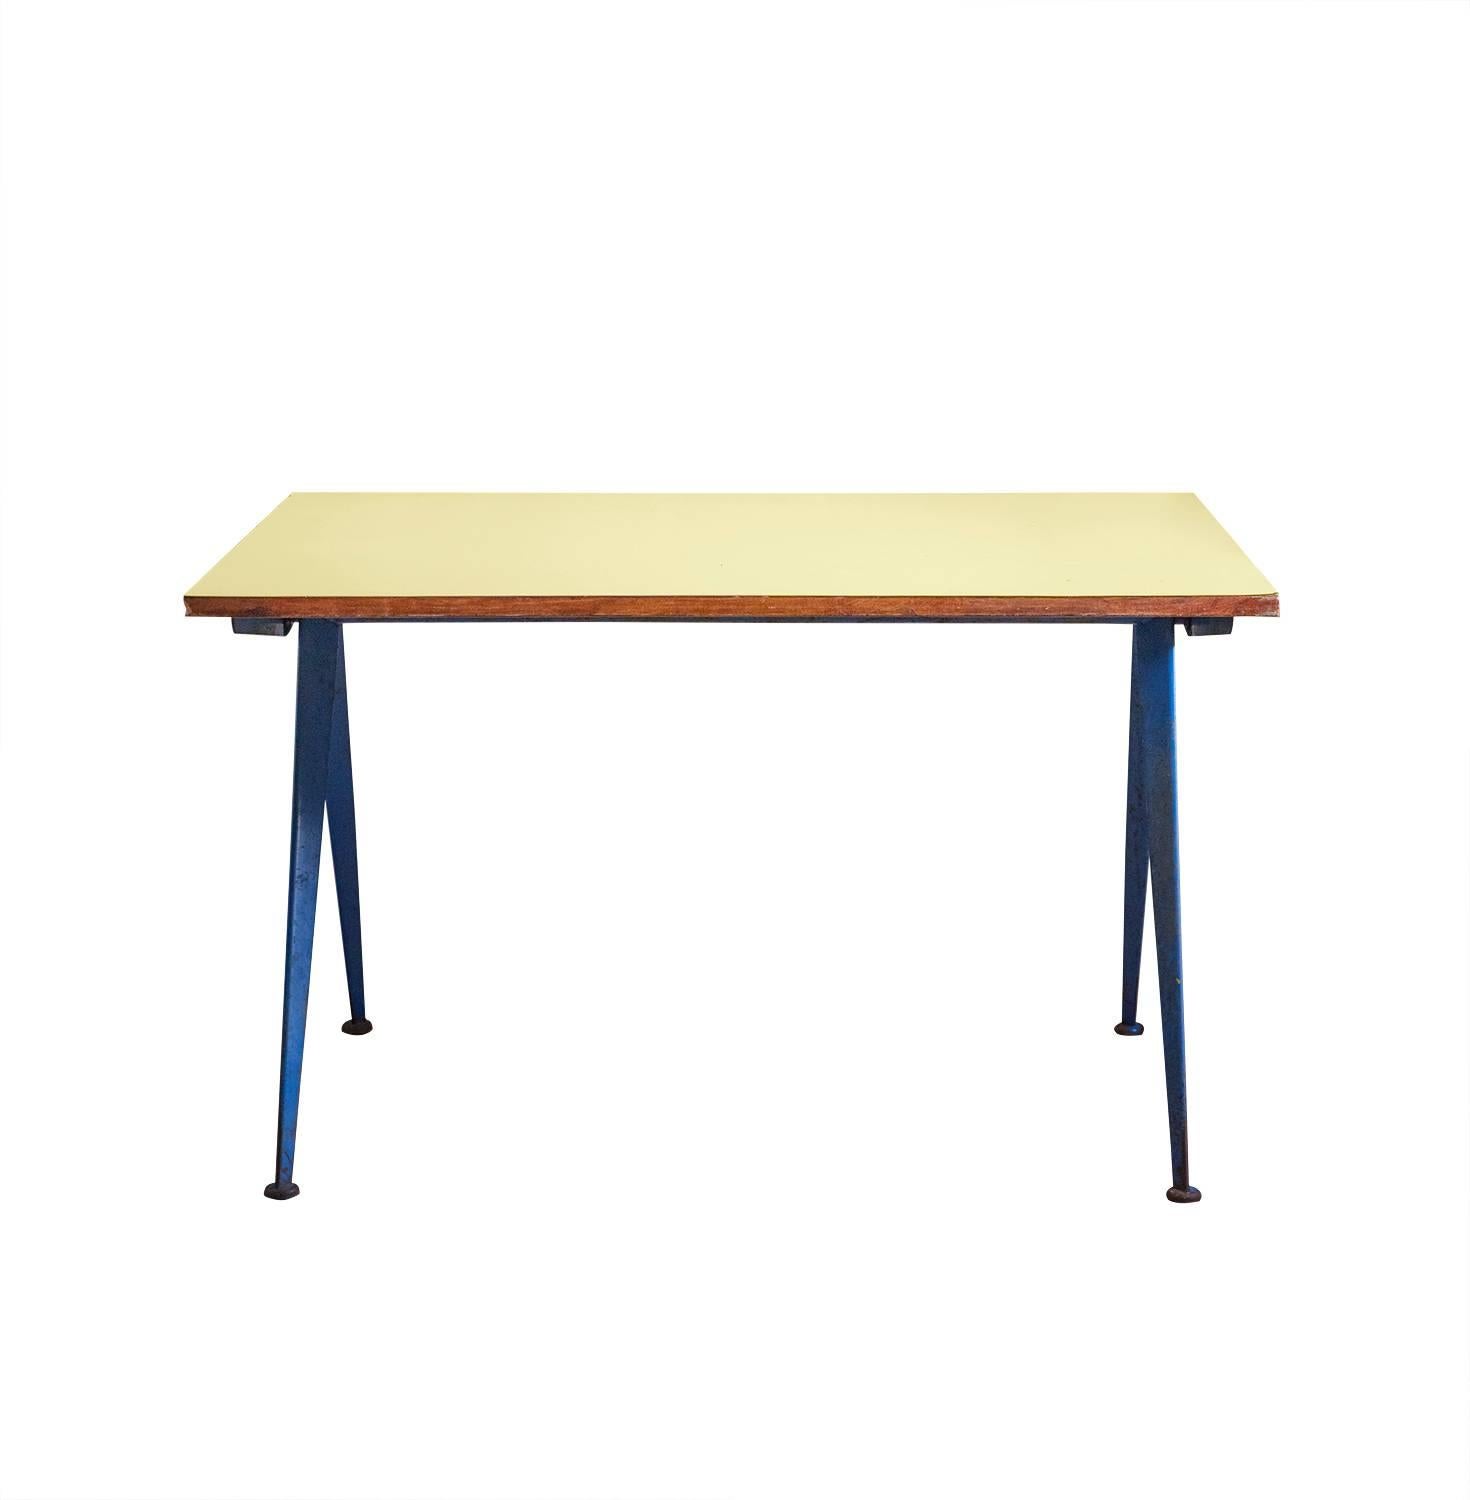 Compas table, model Cafétéria n. 512 table, designed by Jean Prouvé 
Bent sheet steel and laminated wood. 
In yellow and blue.
    